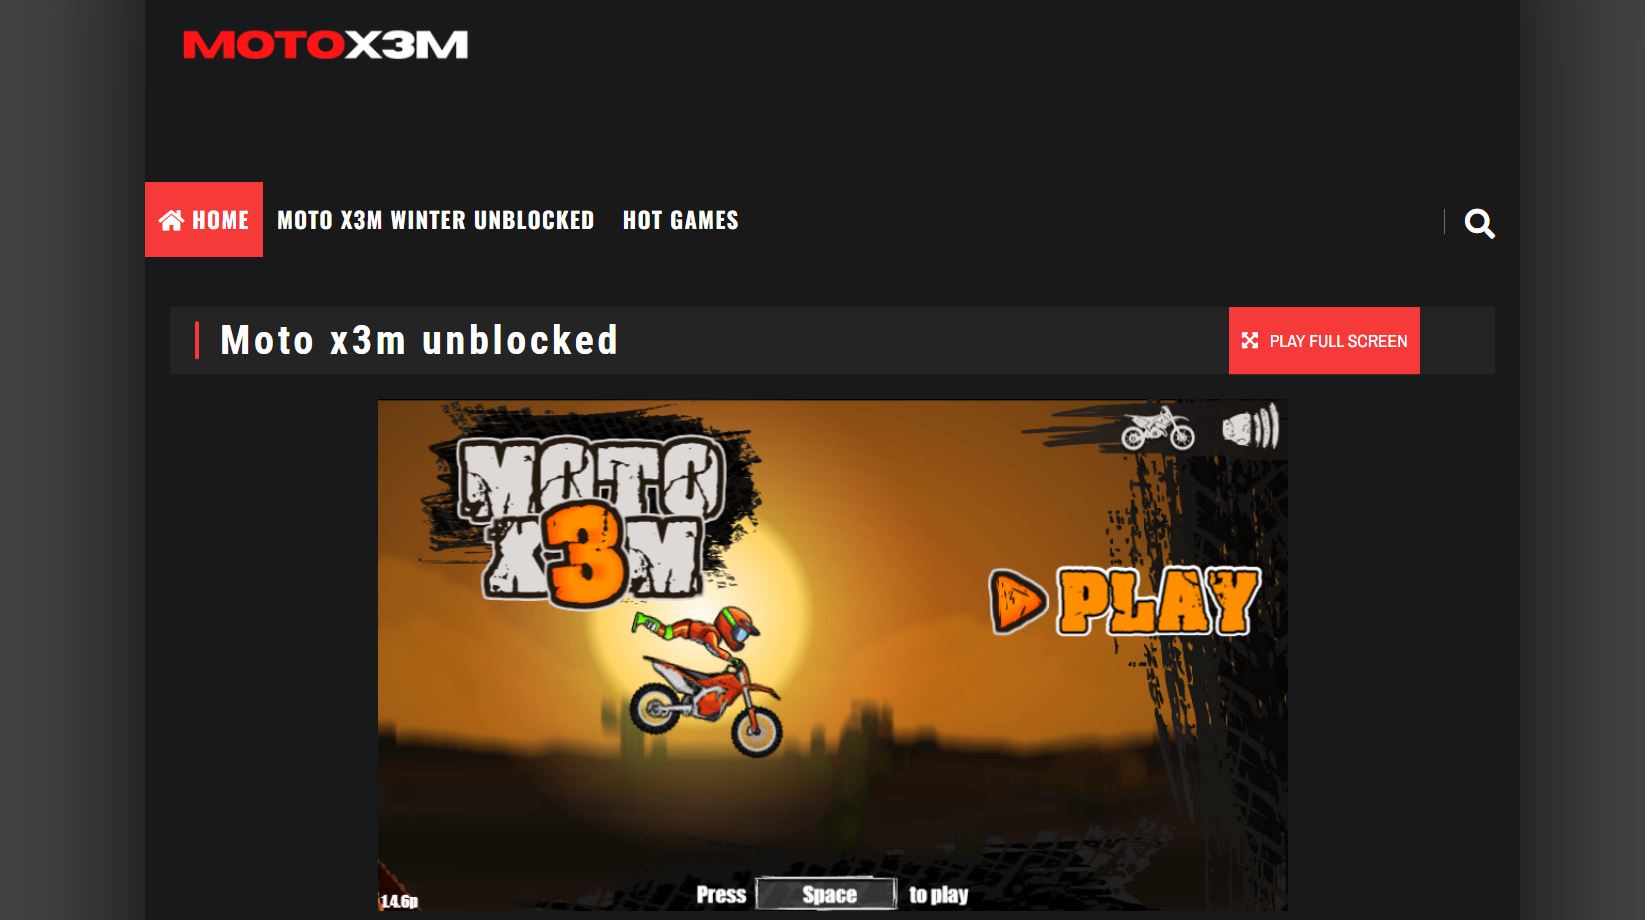 Motox3m.info - A Site Devoted To The Fans Of MotoX3M